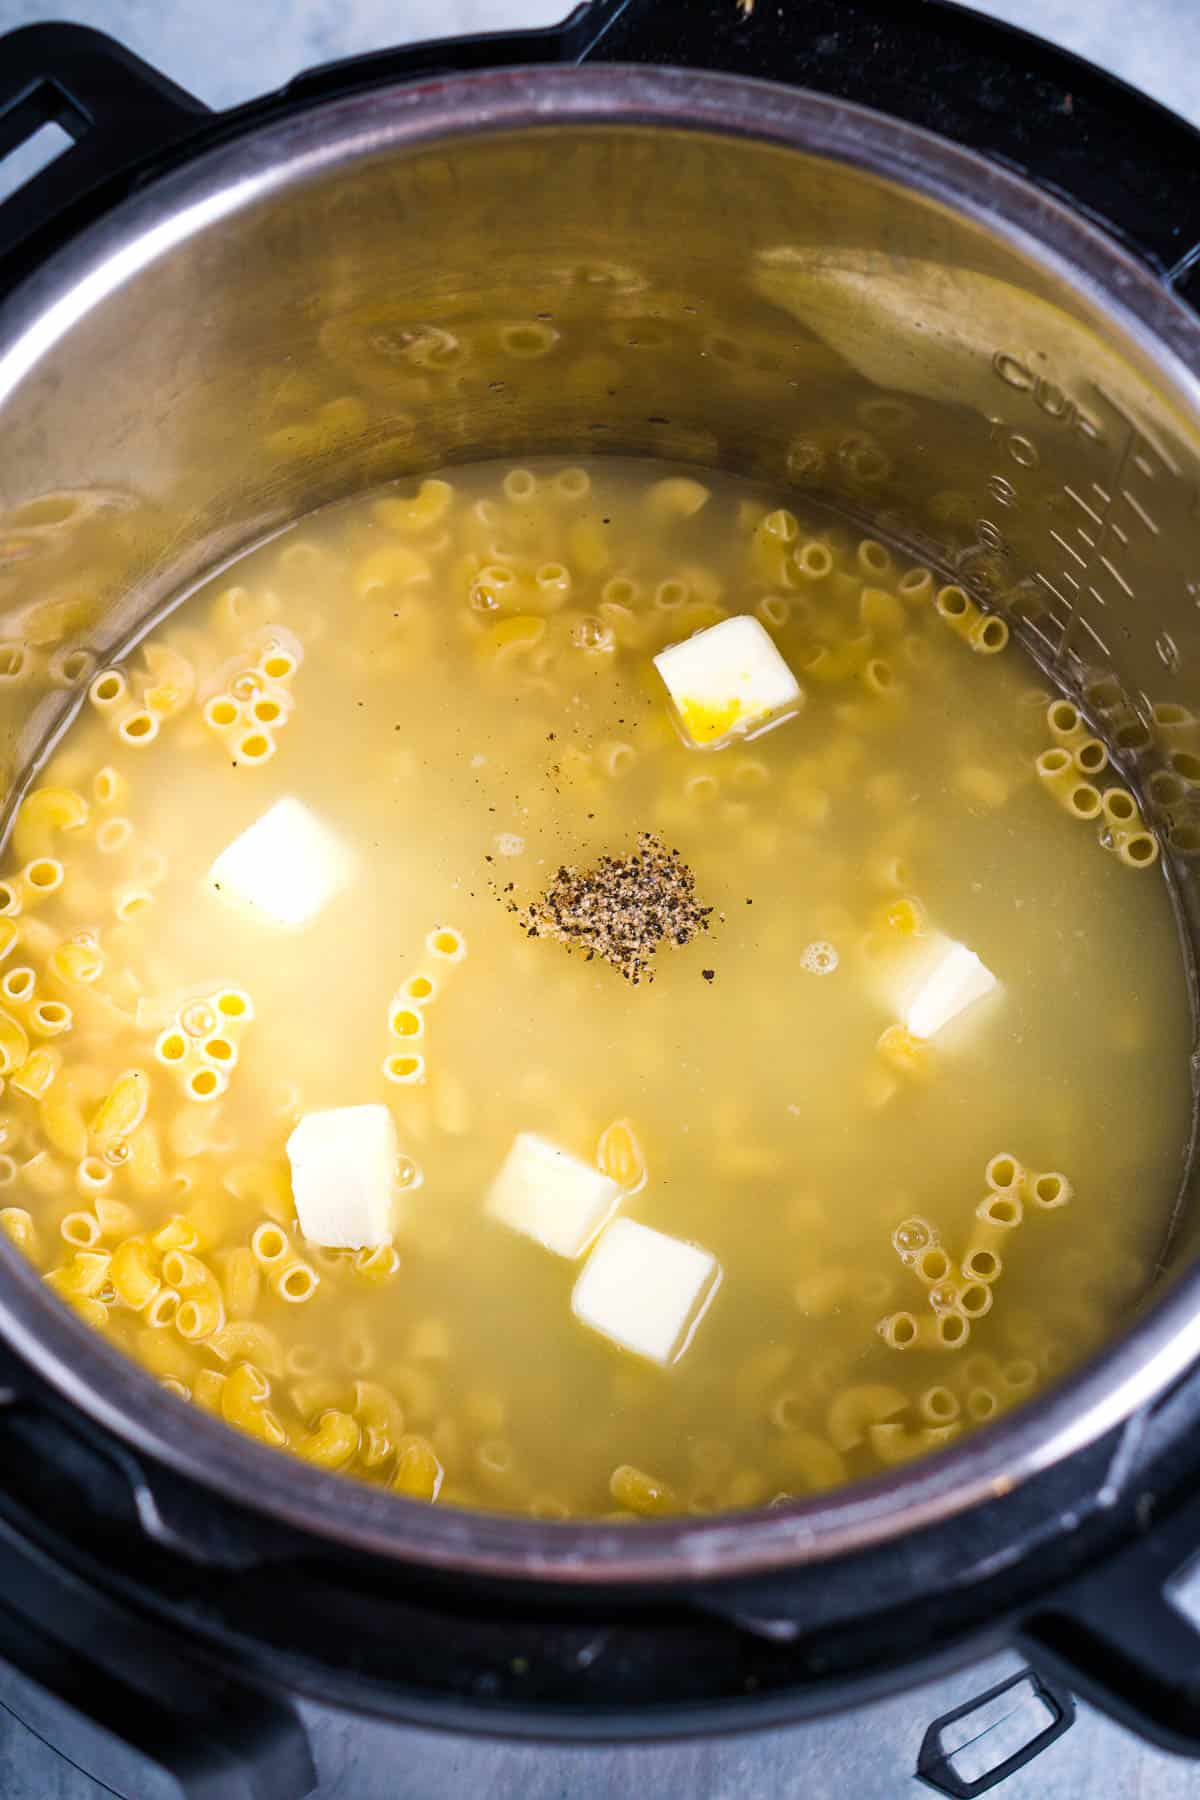 uncooked macaroni noodles, broth, butter, and black pepper in Instant Pot